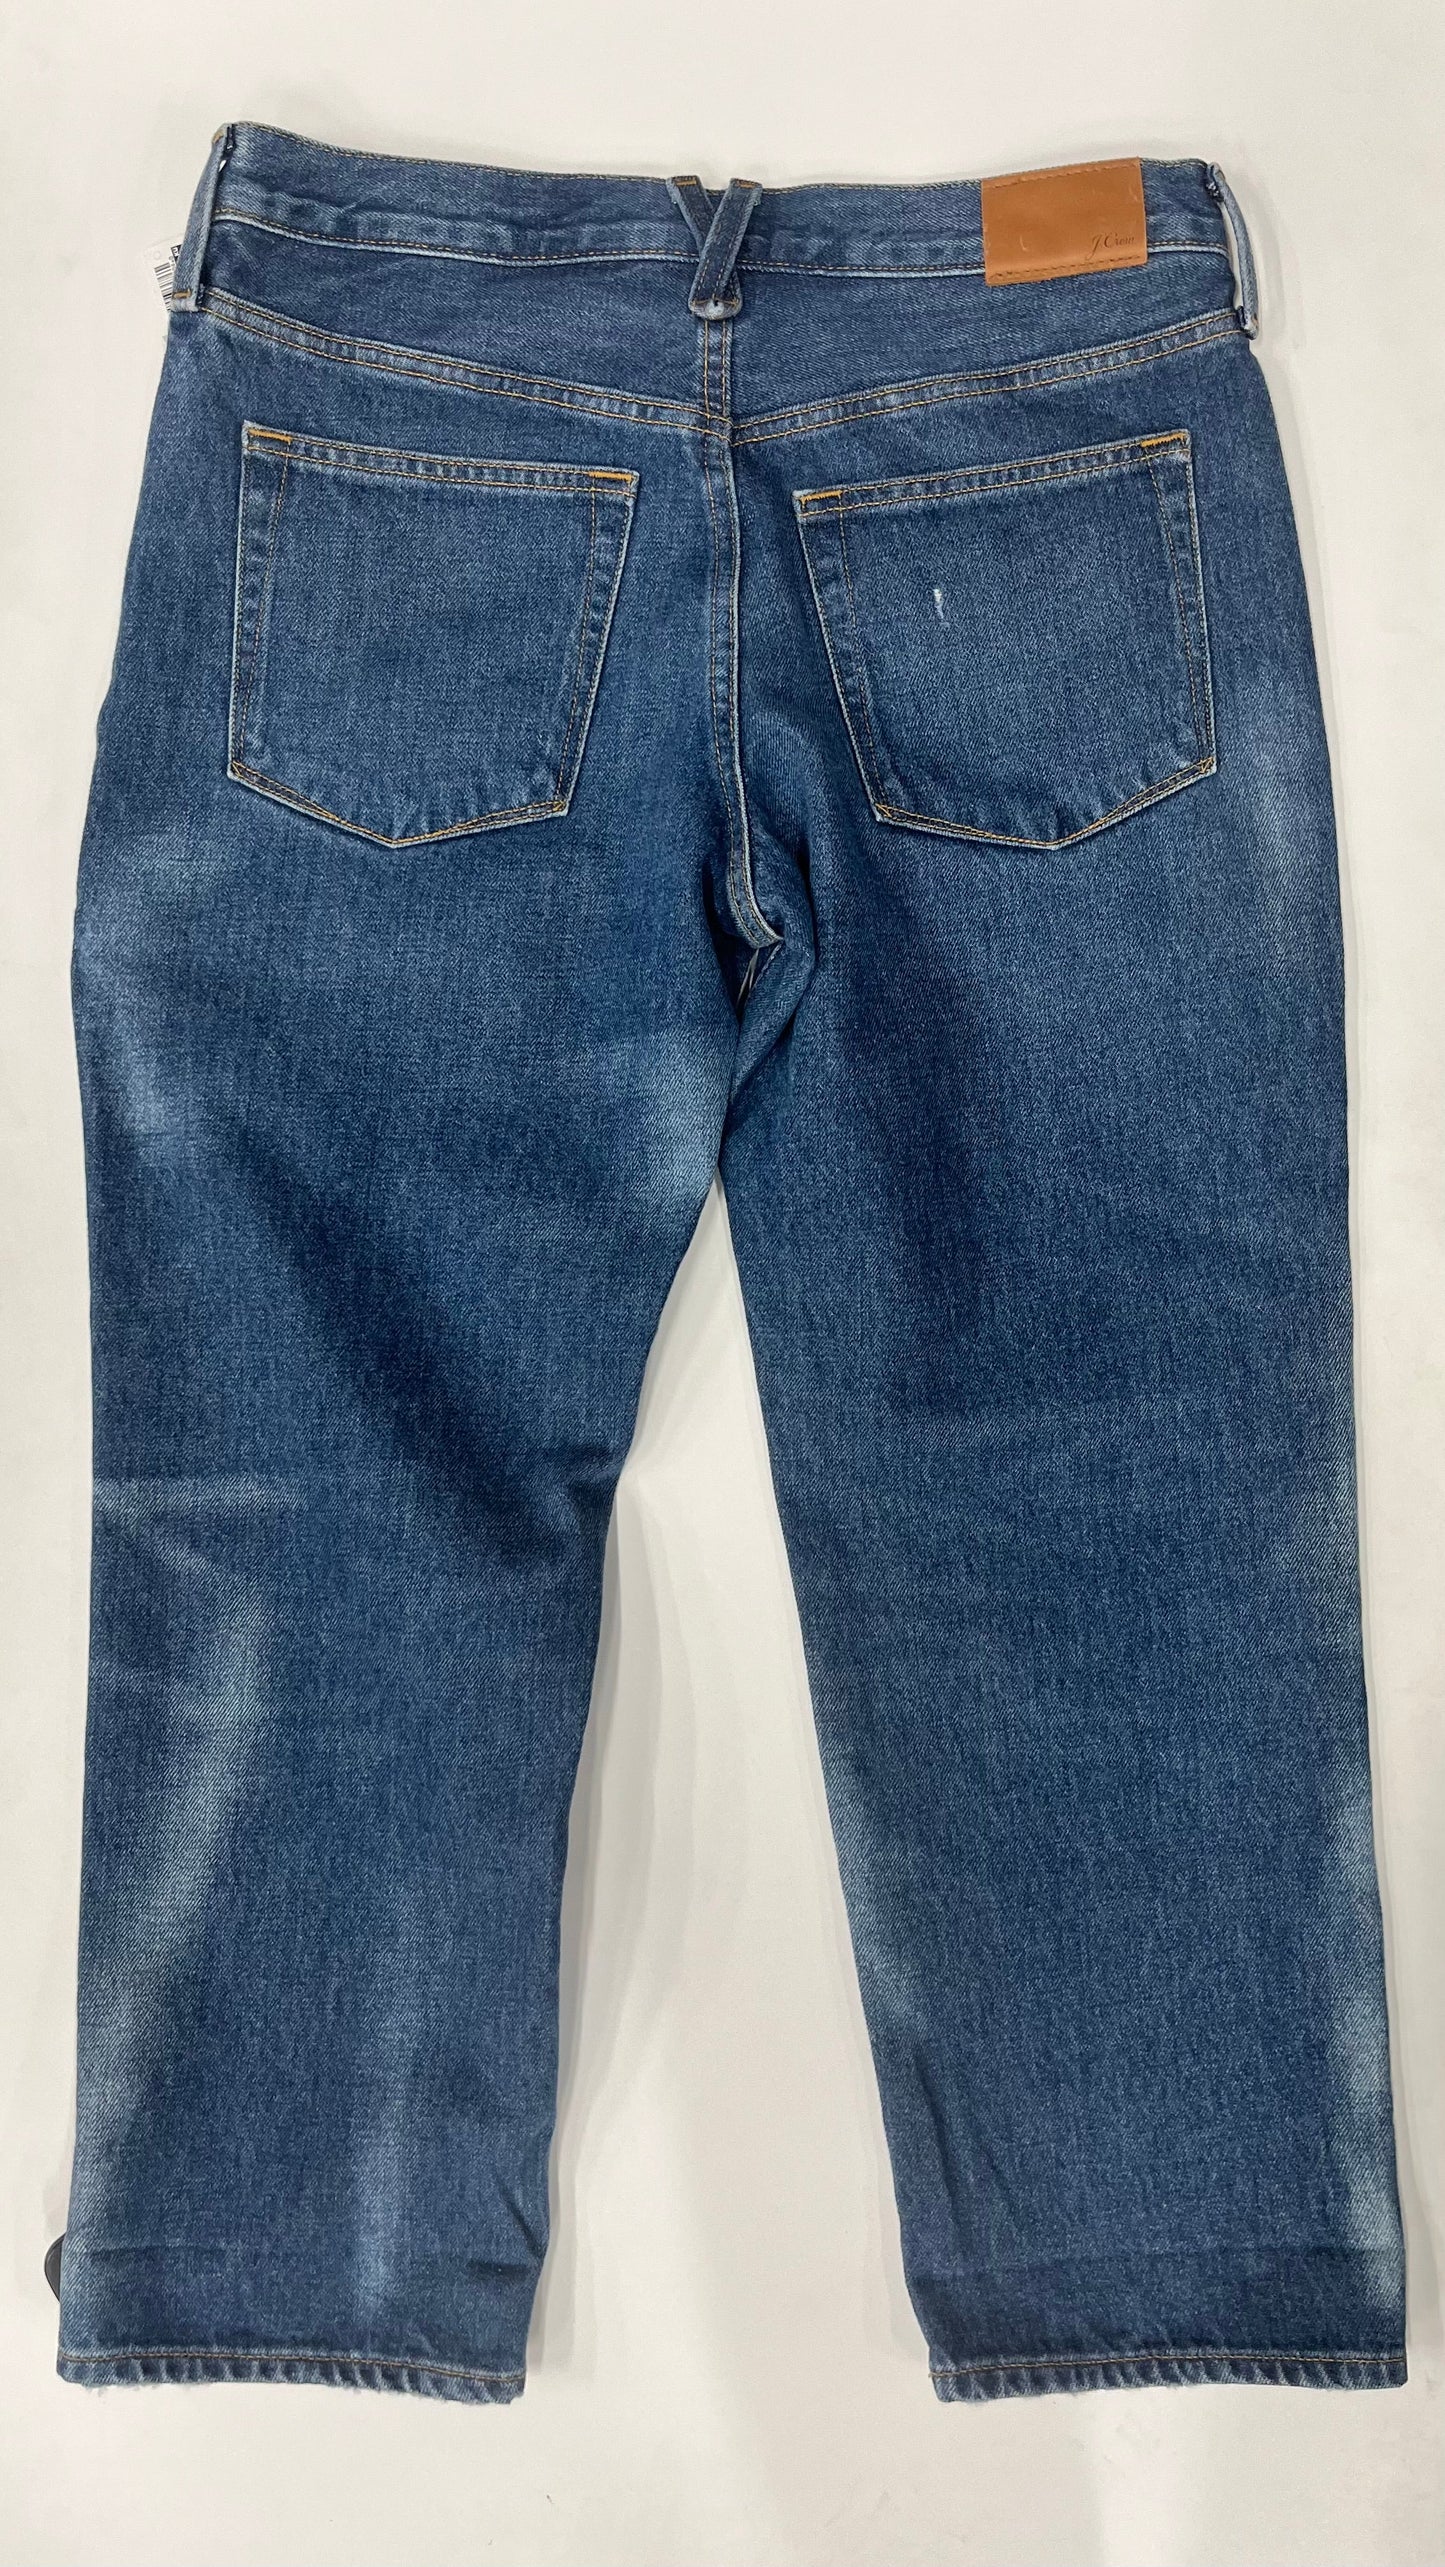 Jeans By J Crew NWT  Size: 4petite